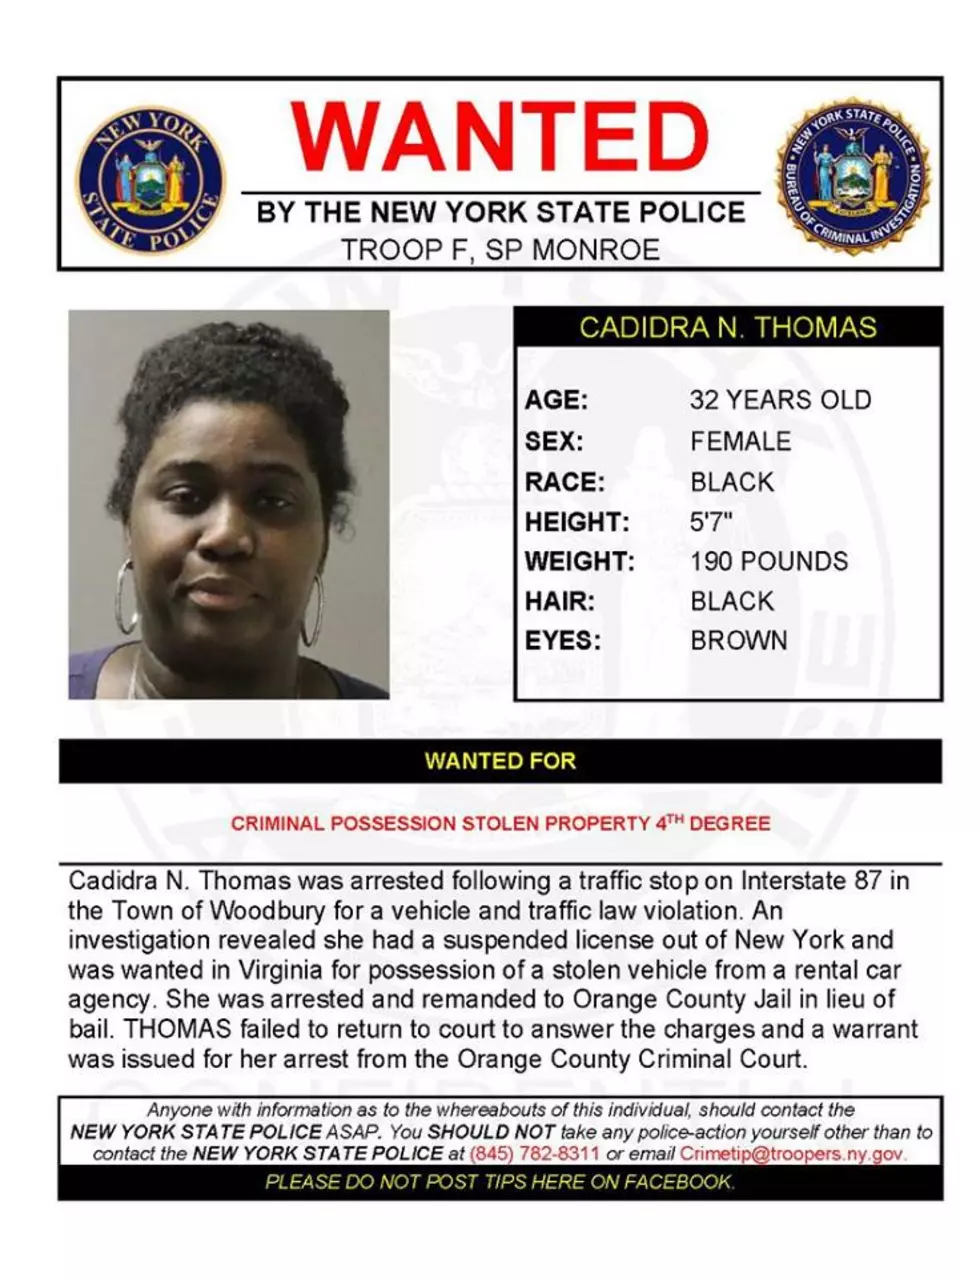 Warrant Wednesday: Orange County Woman Wanted For Possession of Stolen Property